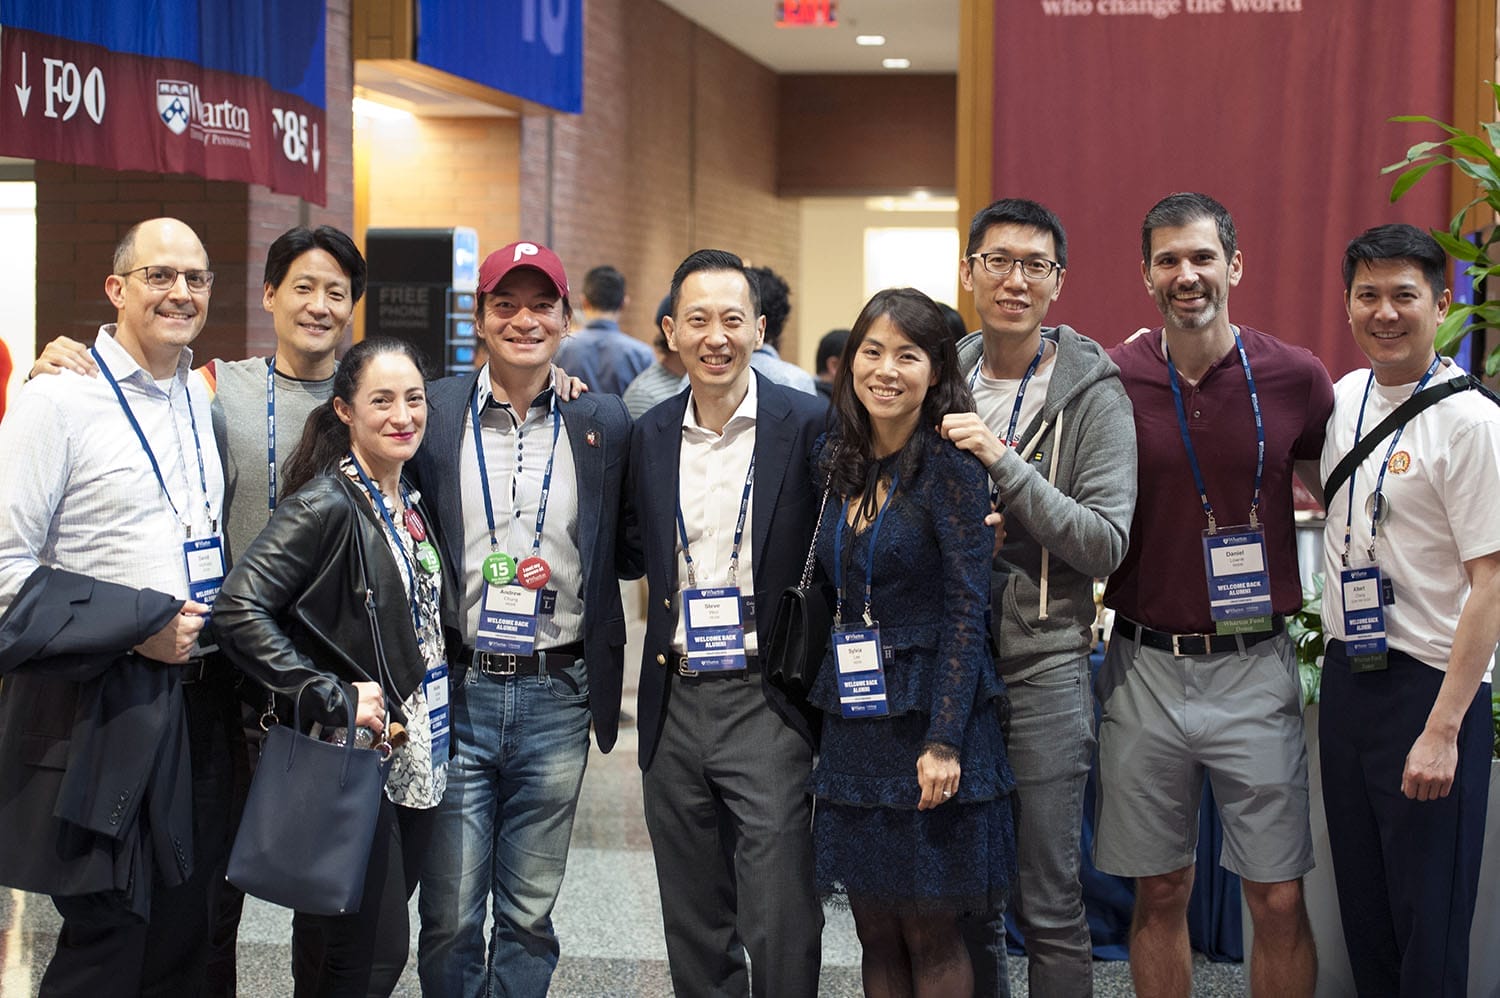 Nine attendees at Wharton Reunion Reimagined pose for a photo together in Huntsman Hall.